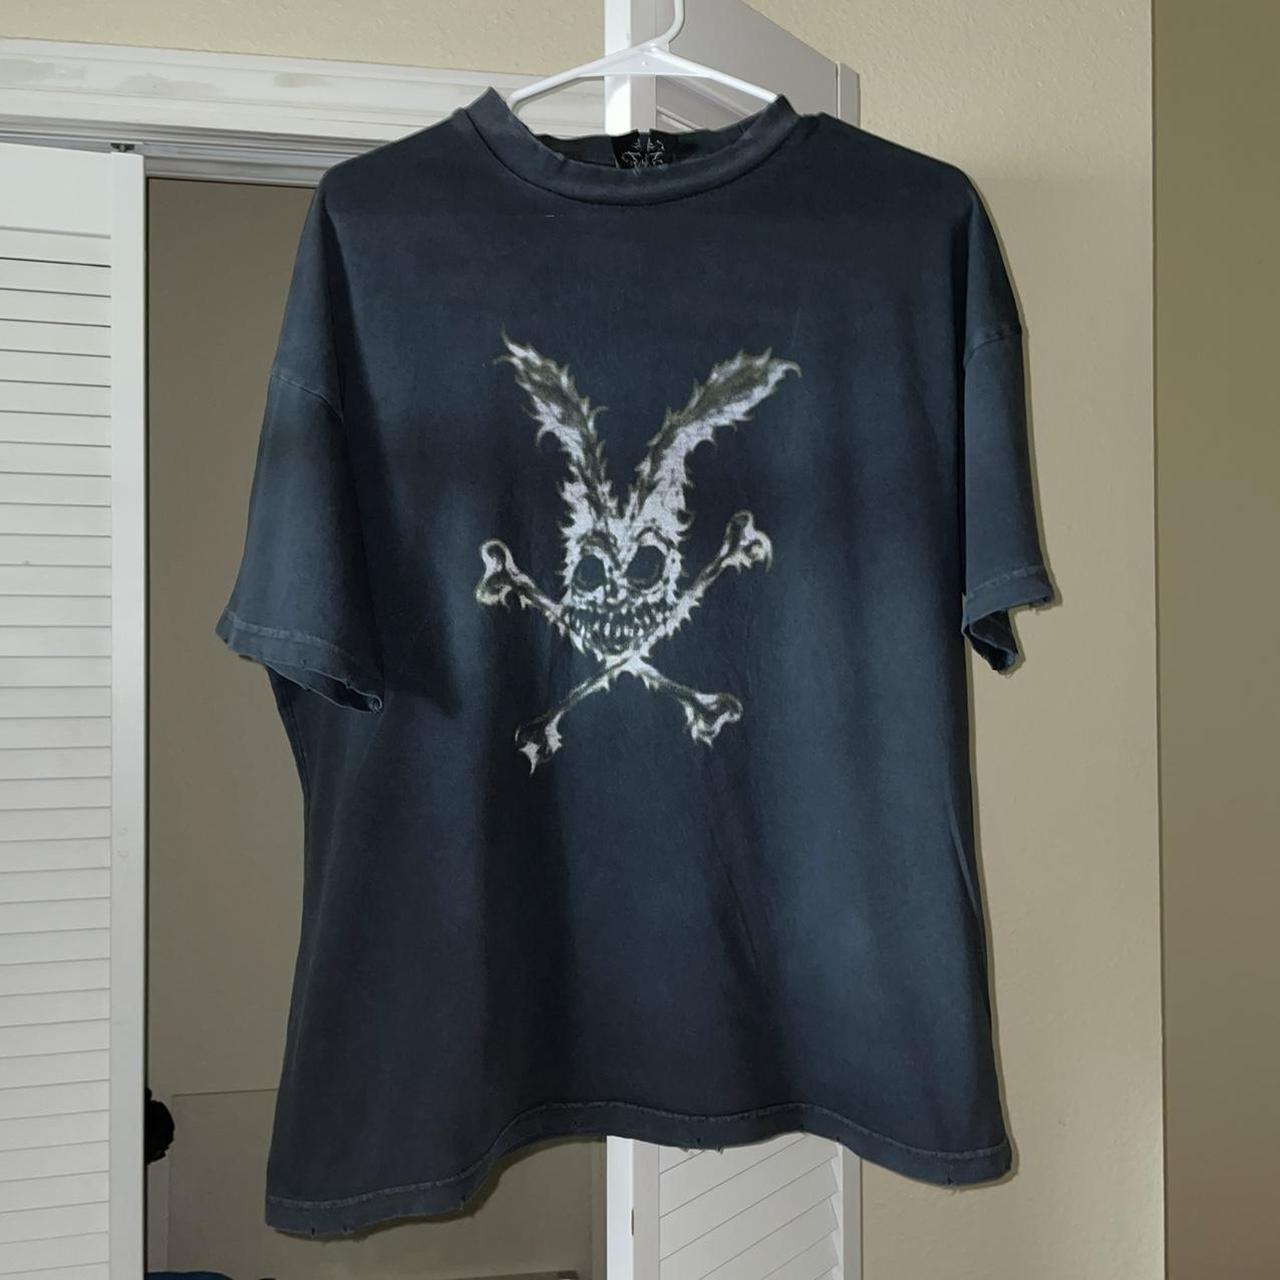 Product Image 2 - #DROPDEAD
Donnie Darko T-Shirt
Minor distressing throughout